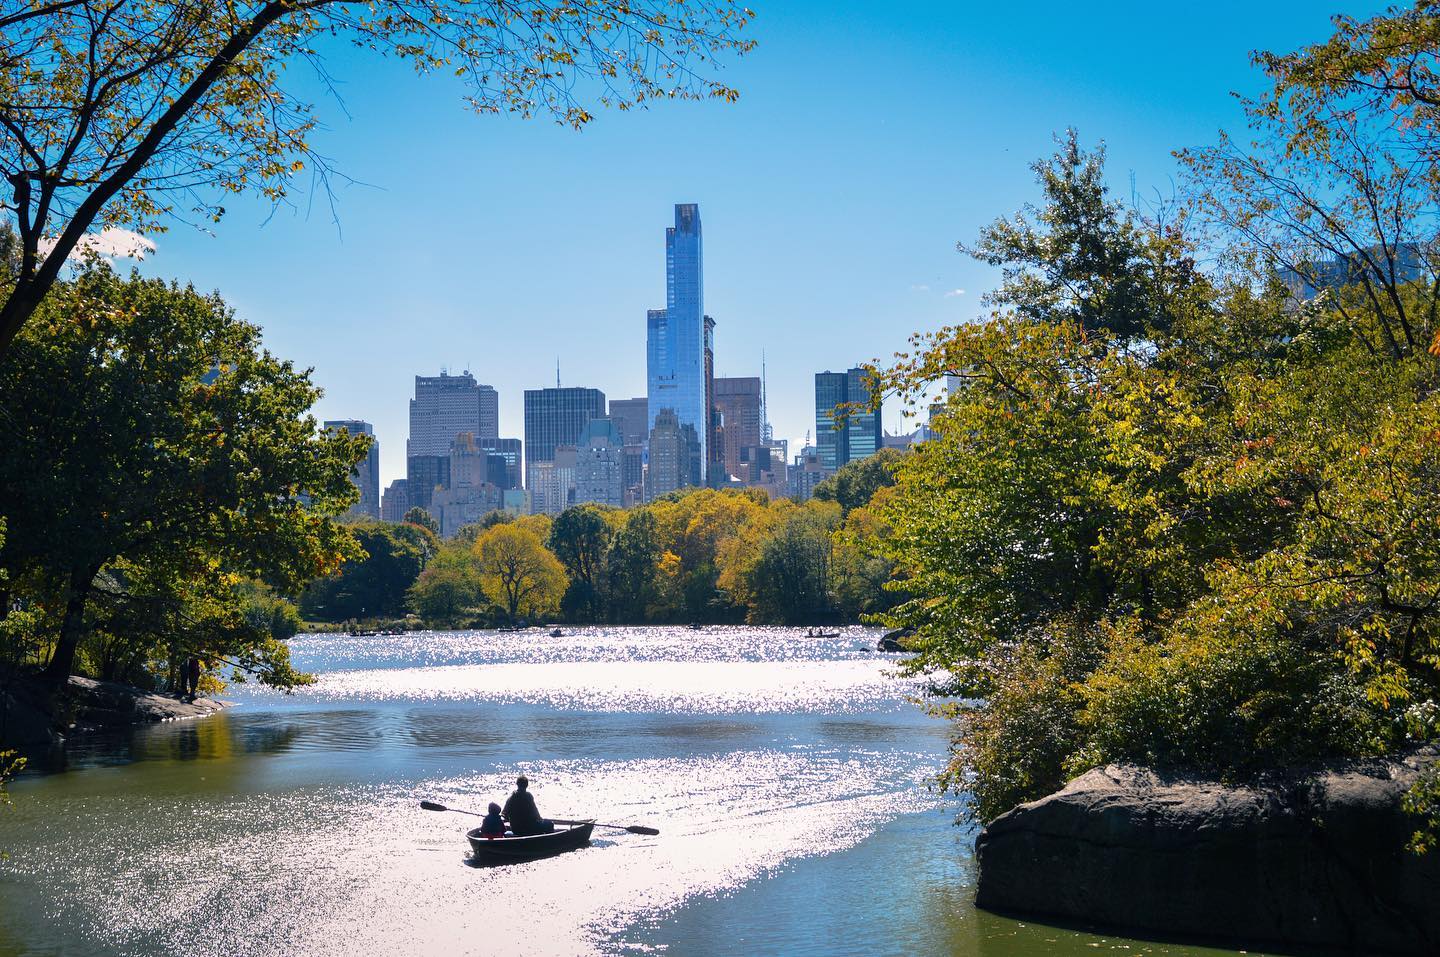 Friday views.

#friday#fridayviews#centralpark#centralparkrowing#manhattan#nyc#nycviews#nycrowing#health#fitness#wellness#lifestyle#nyclifestyle#eliteamenity